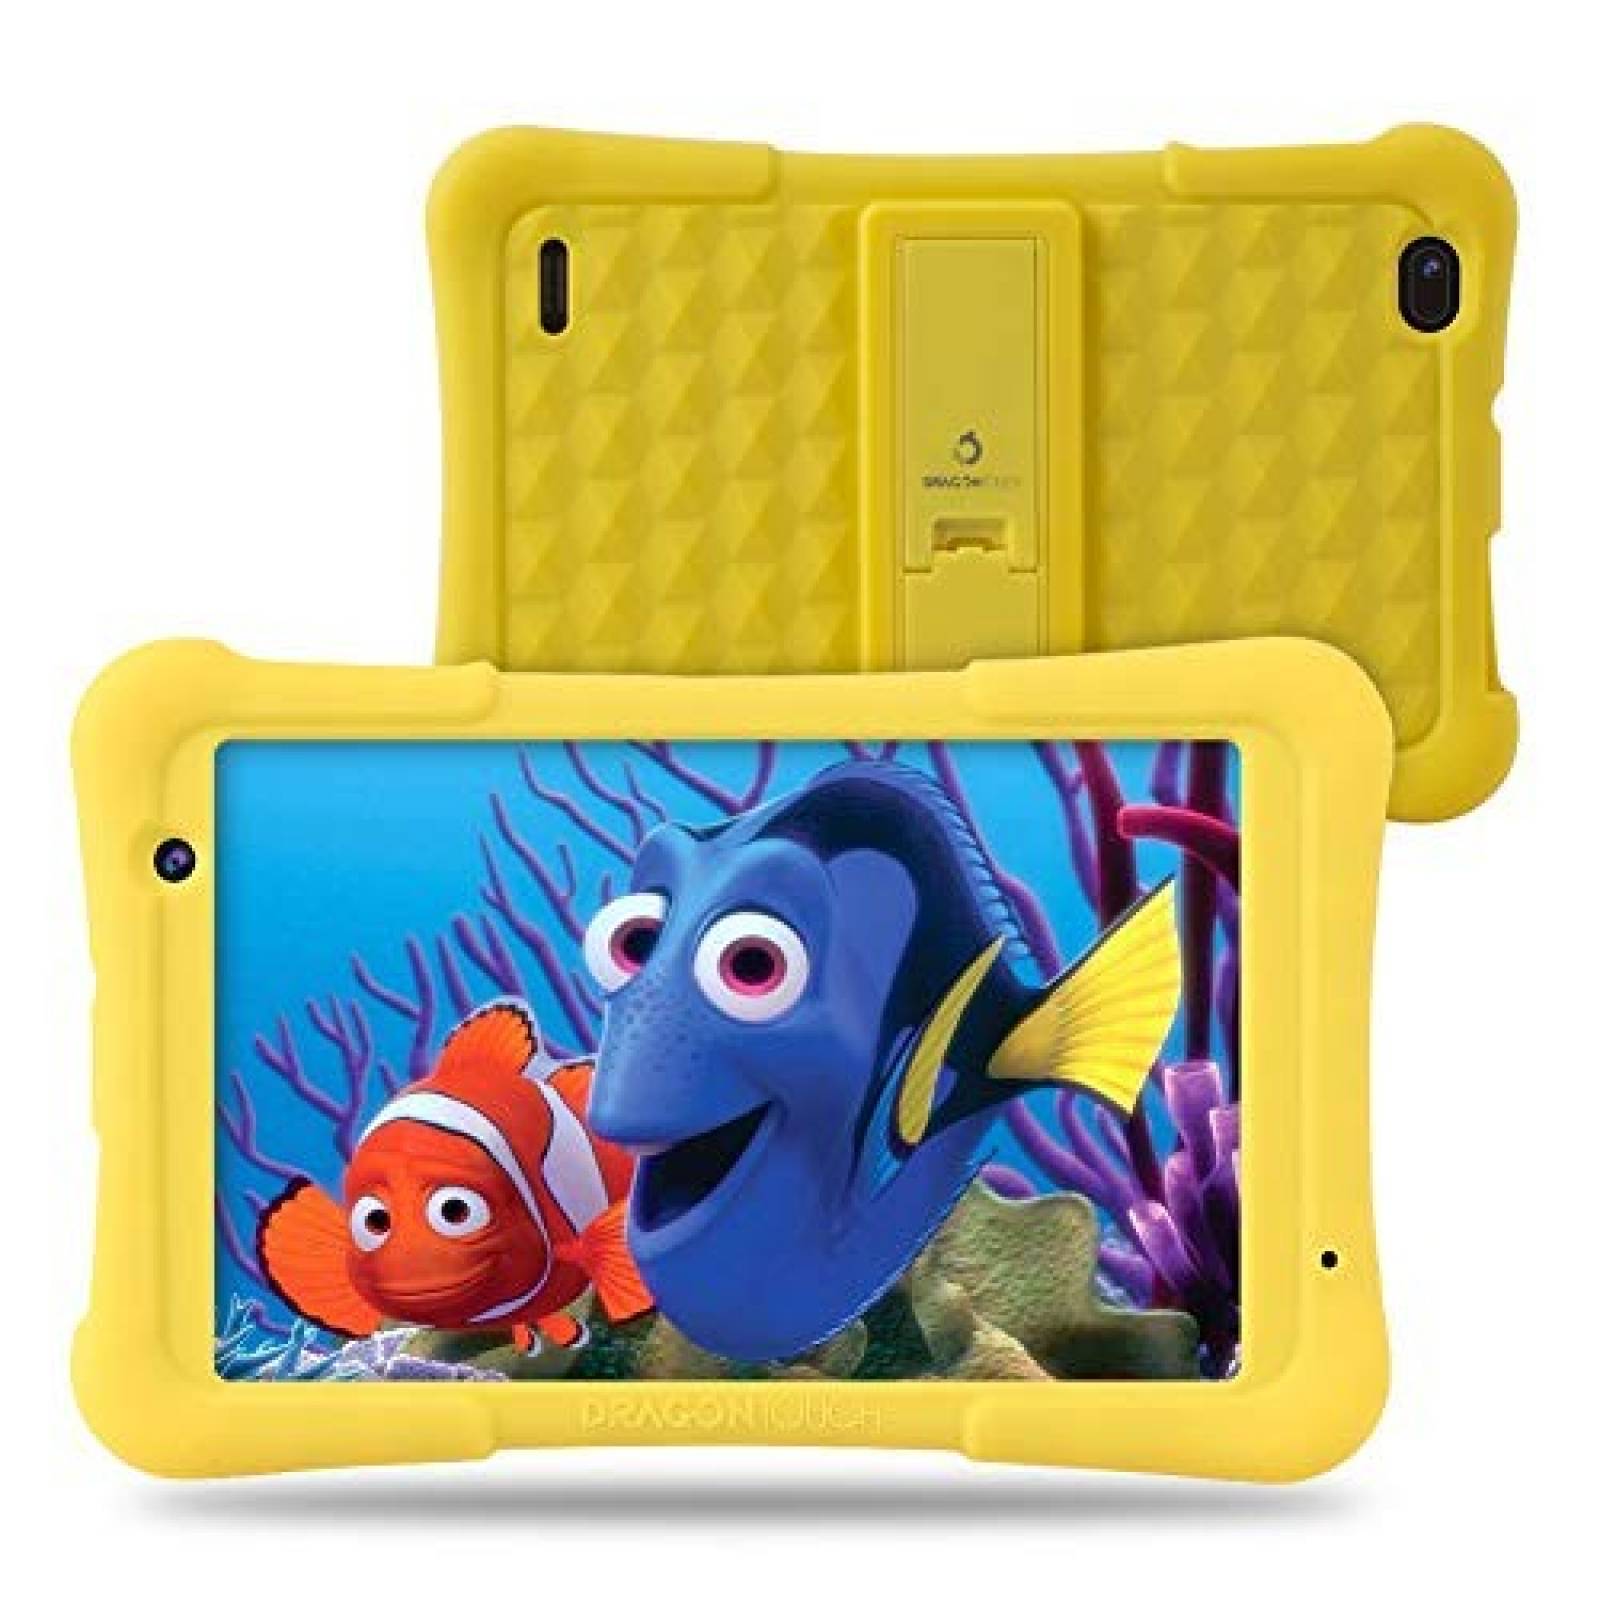 Tablet Dragon Touch Y80 Kids 16GB Android -amarillo